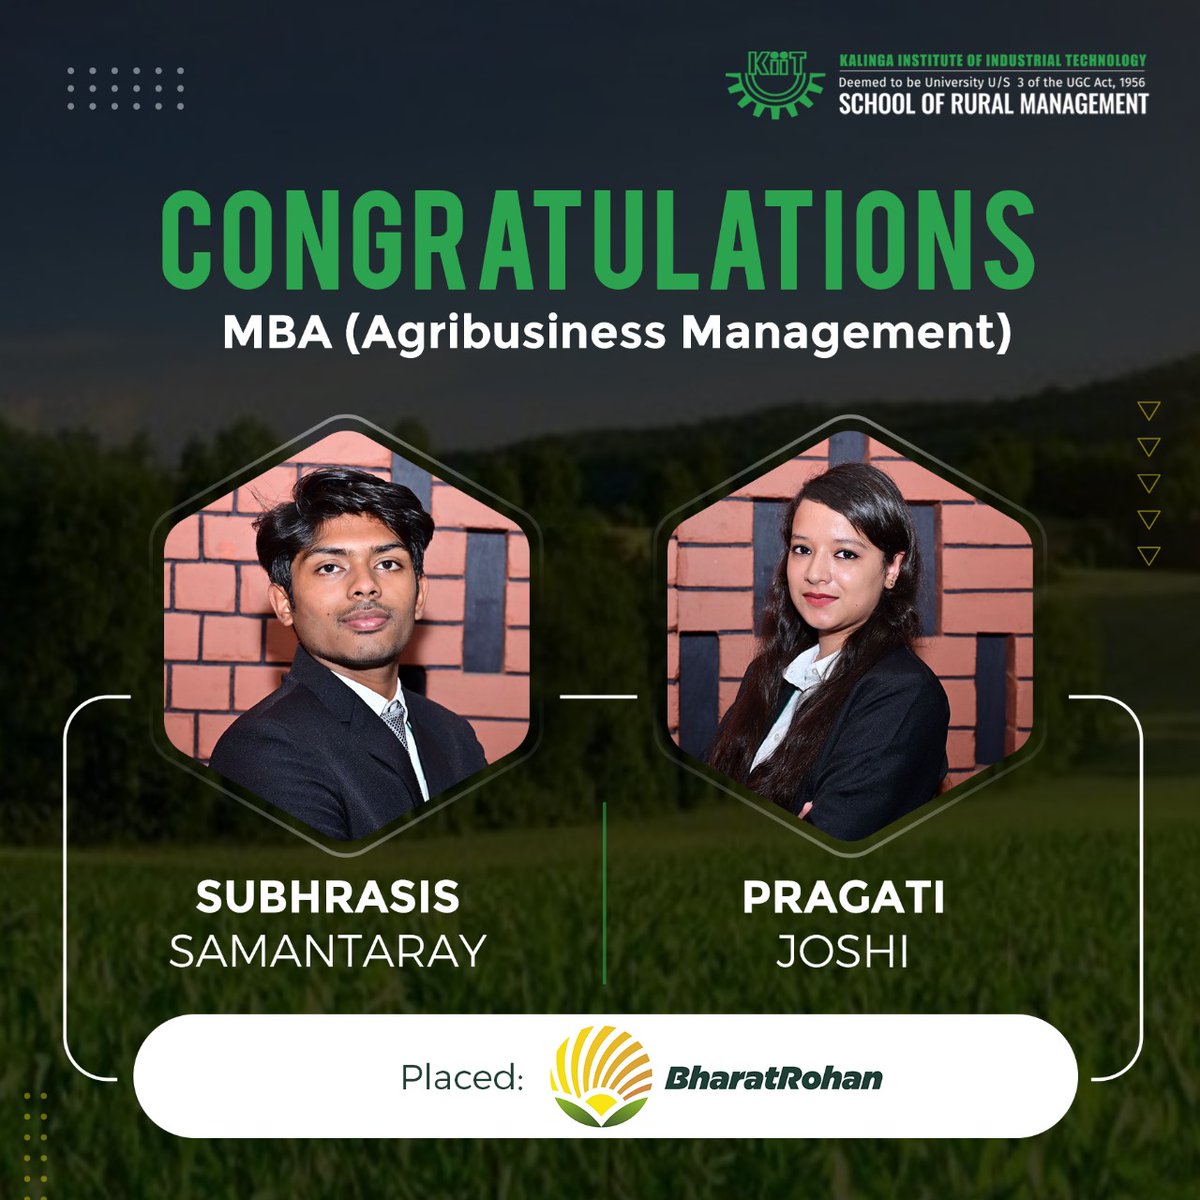 KSRM maintains its stellar placement record in 2024. Congratulations to our MBA (Agribusiness Management) students for their placement at Bharat Rohan. #ksrmbbsr #AgriBusinessManagement #MBA #placement